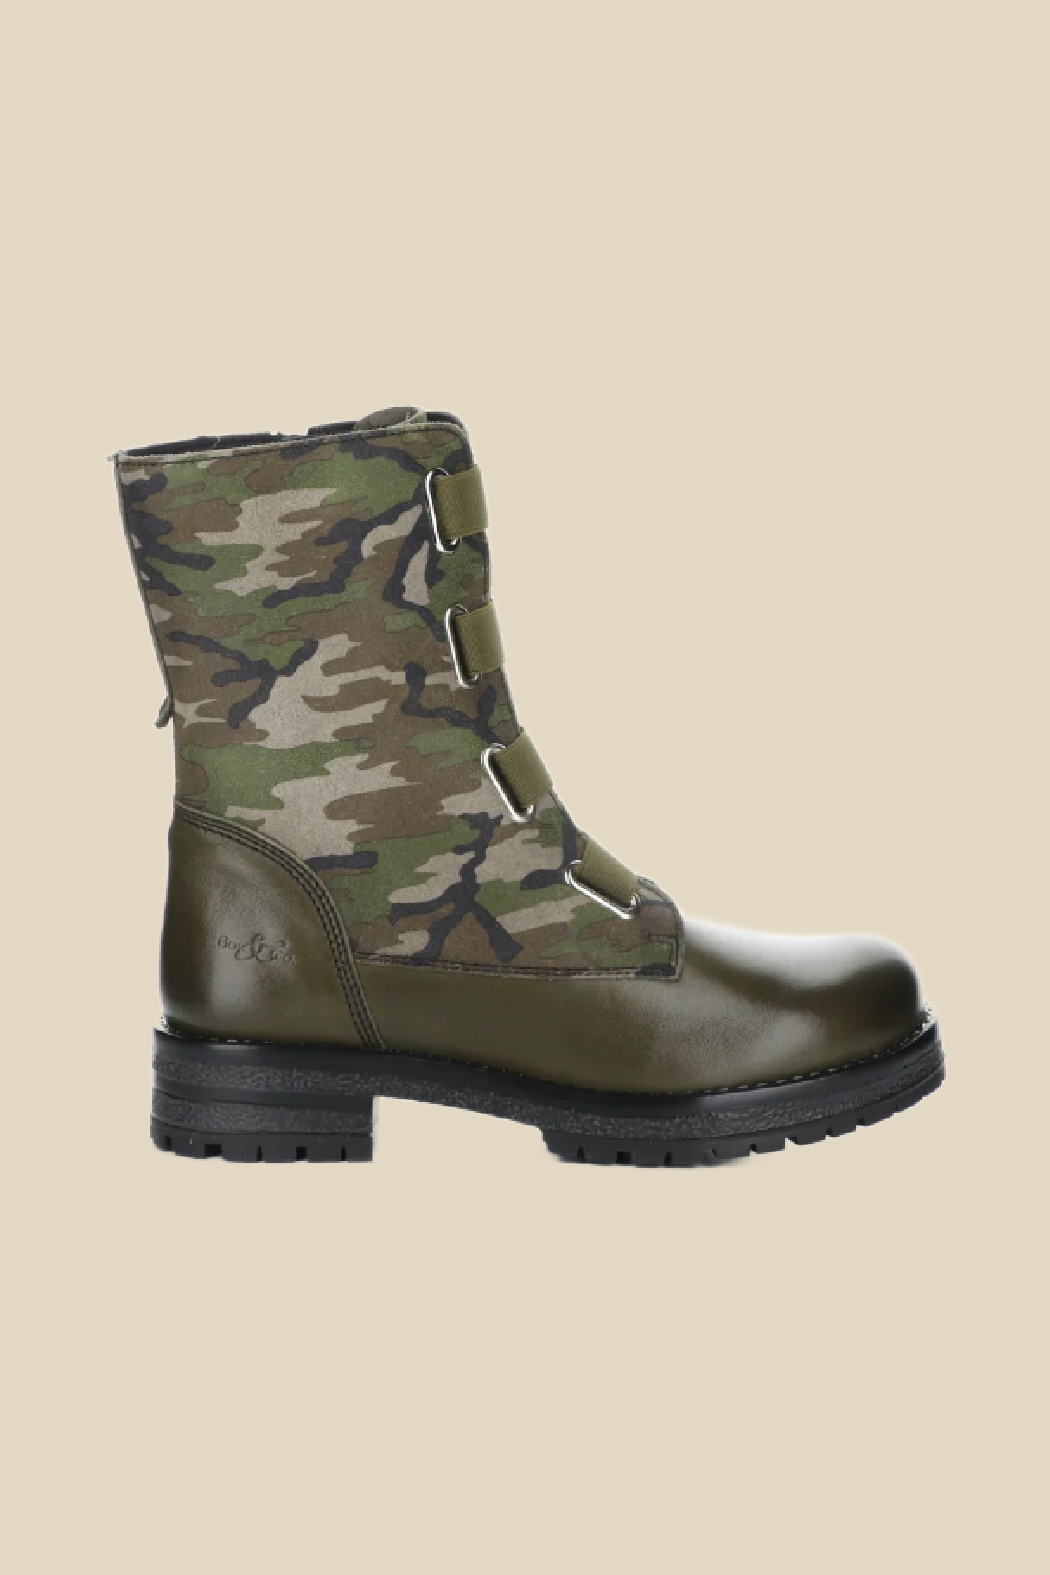 Pause Camo Zip Up Boots